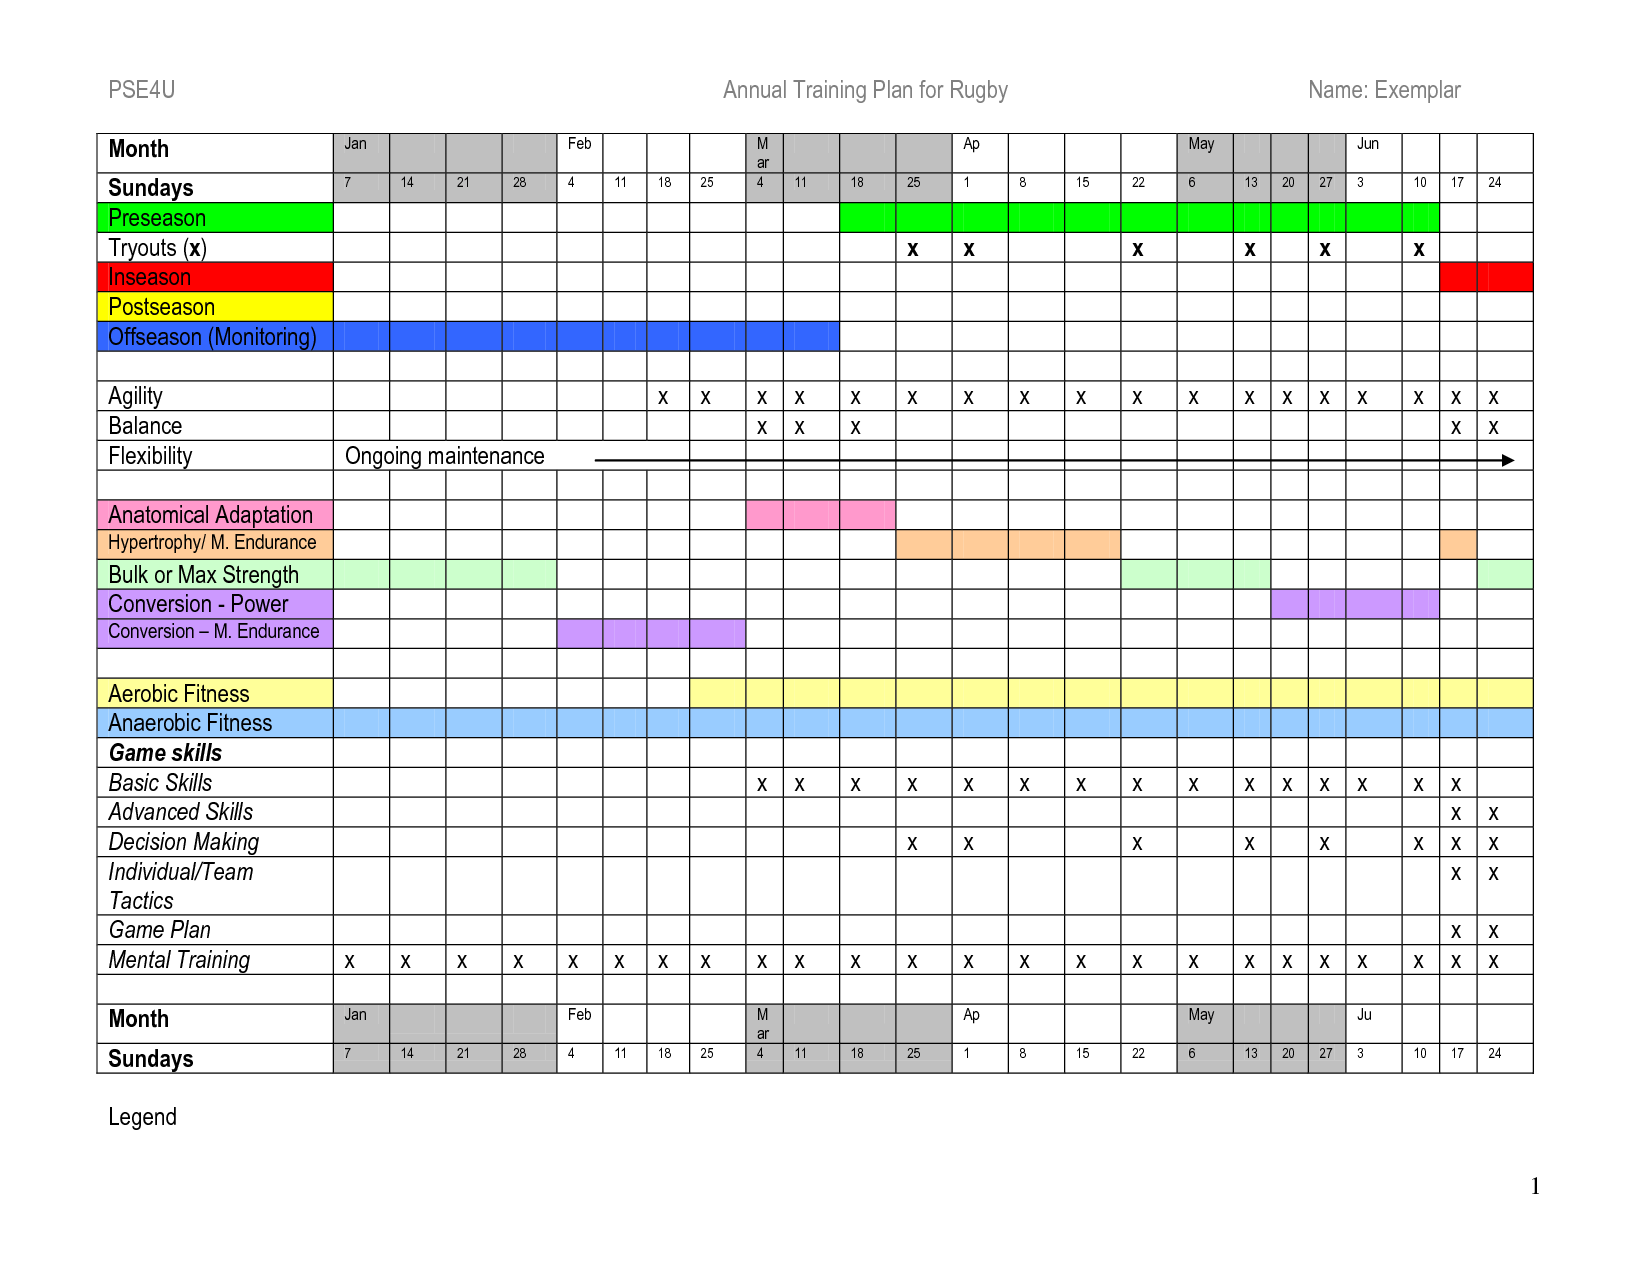 Example of Course Planning Template